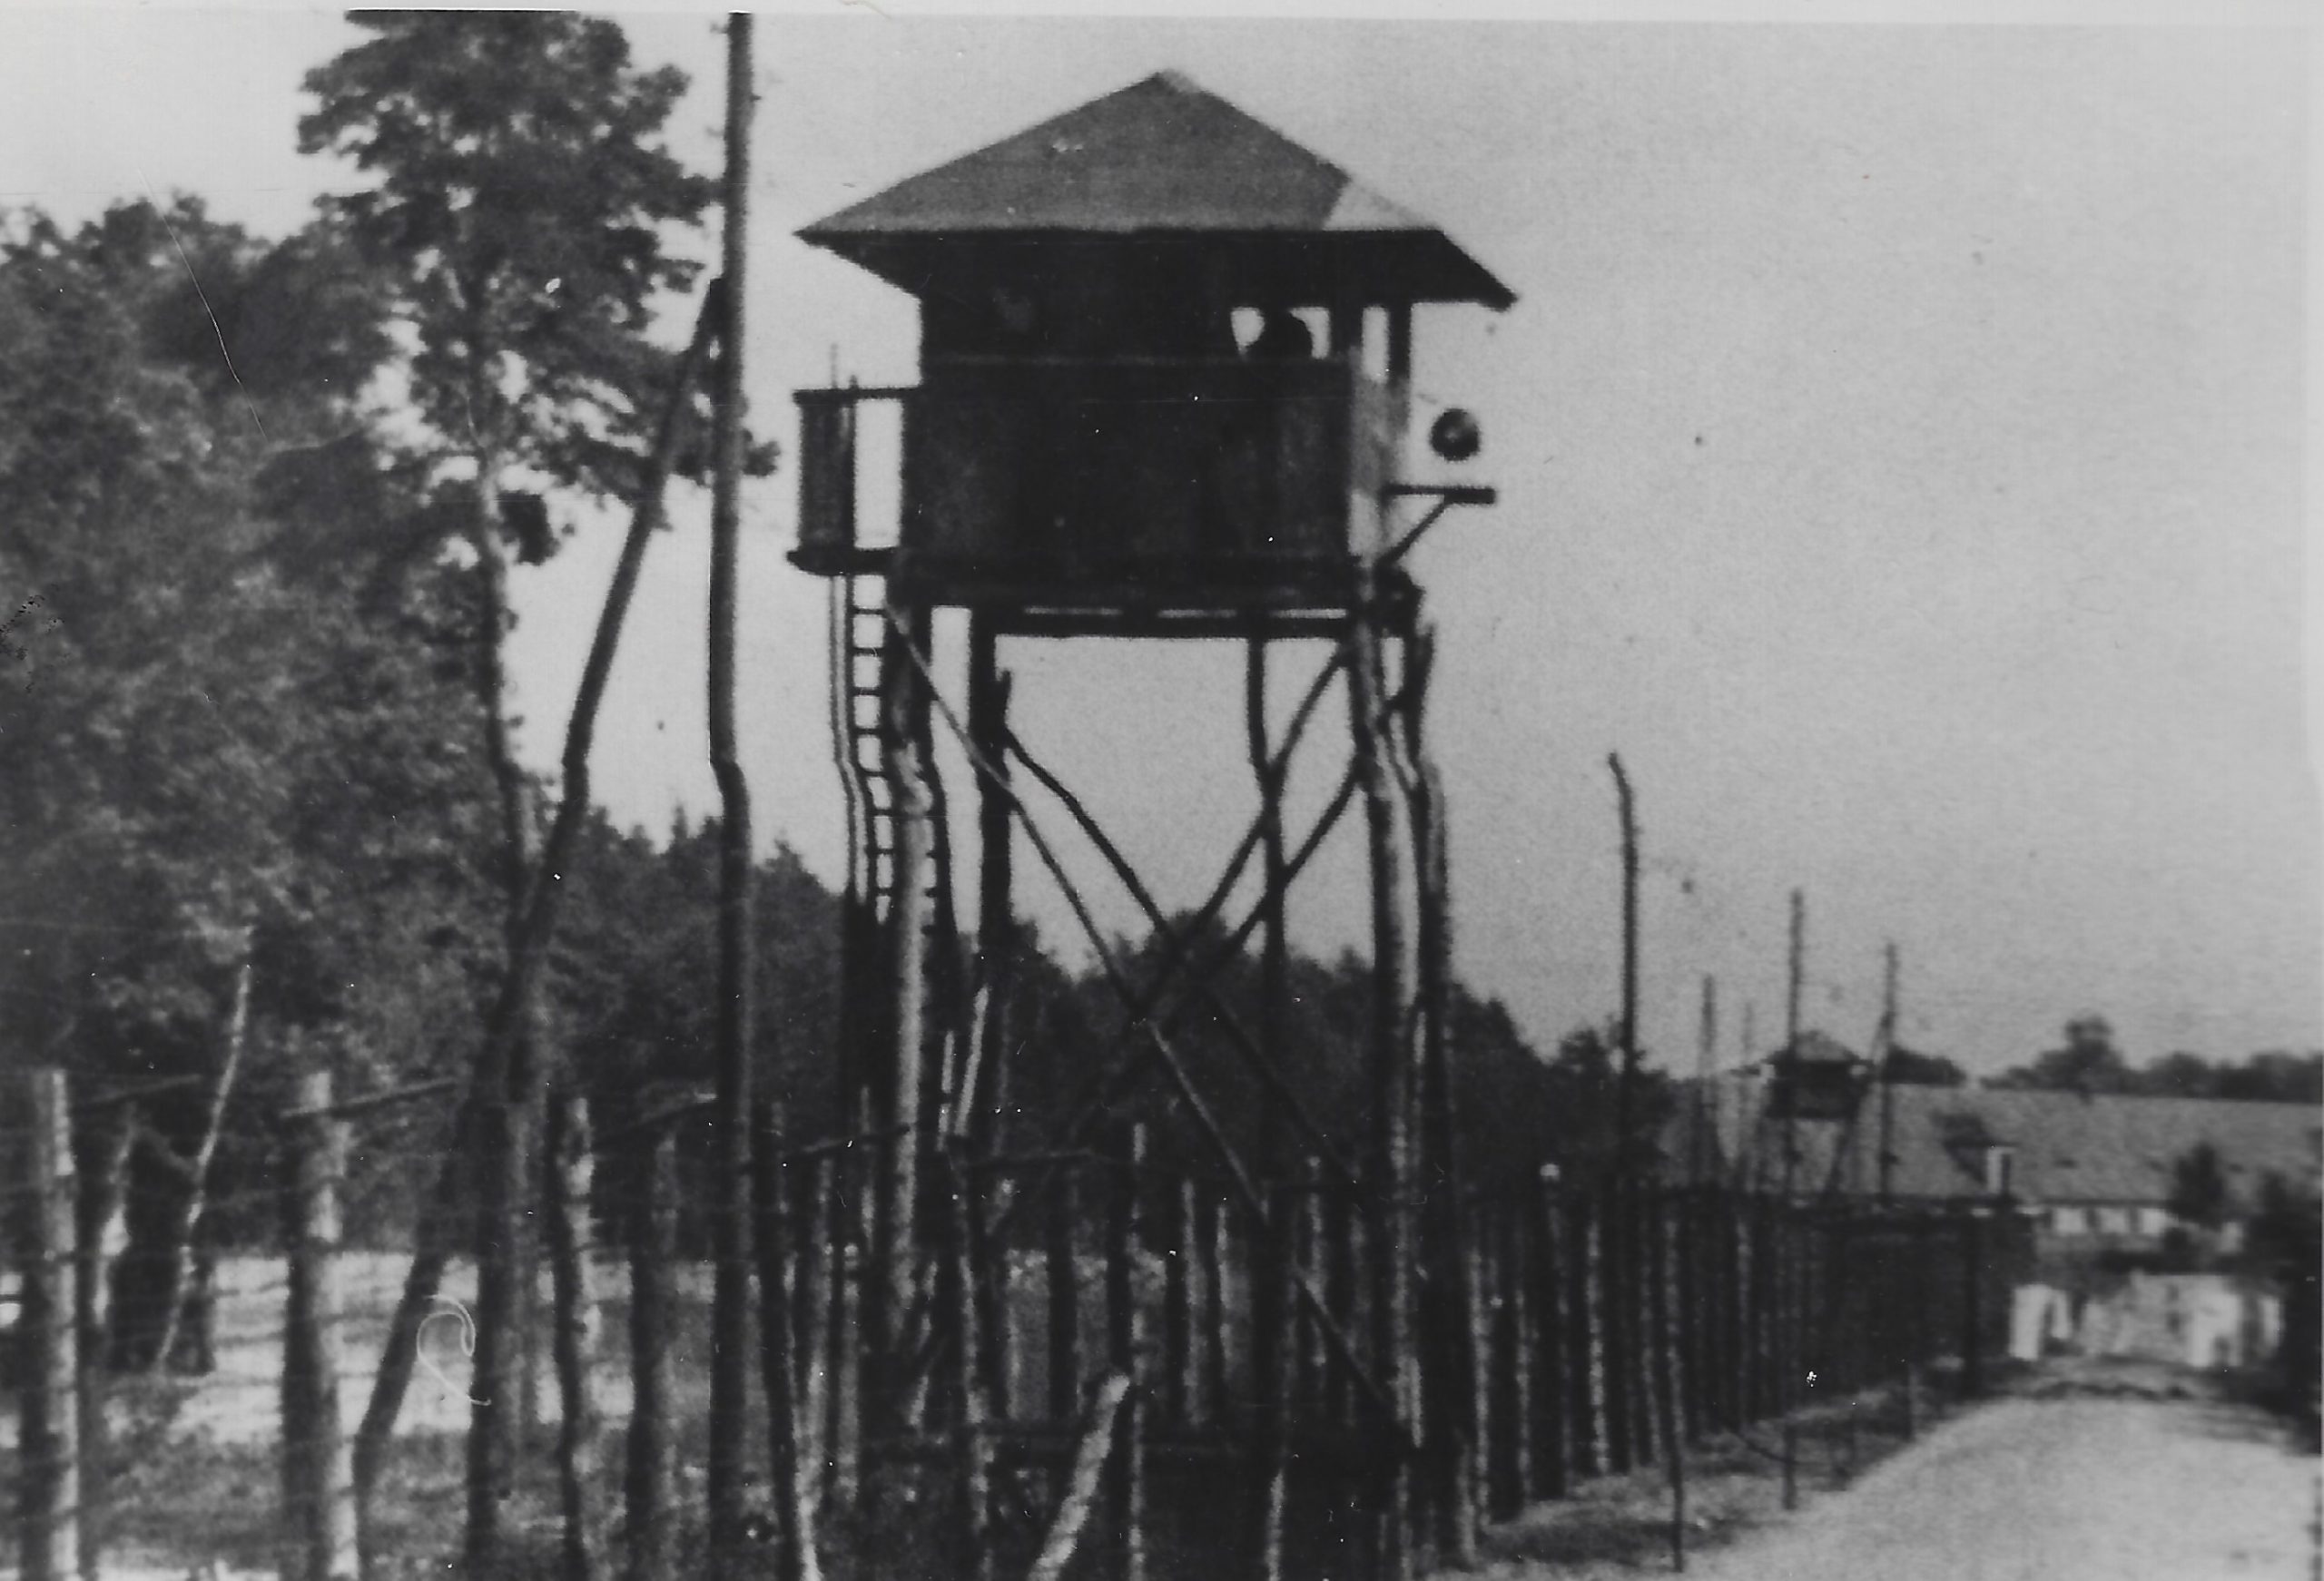 Image of a Guard Tower